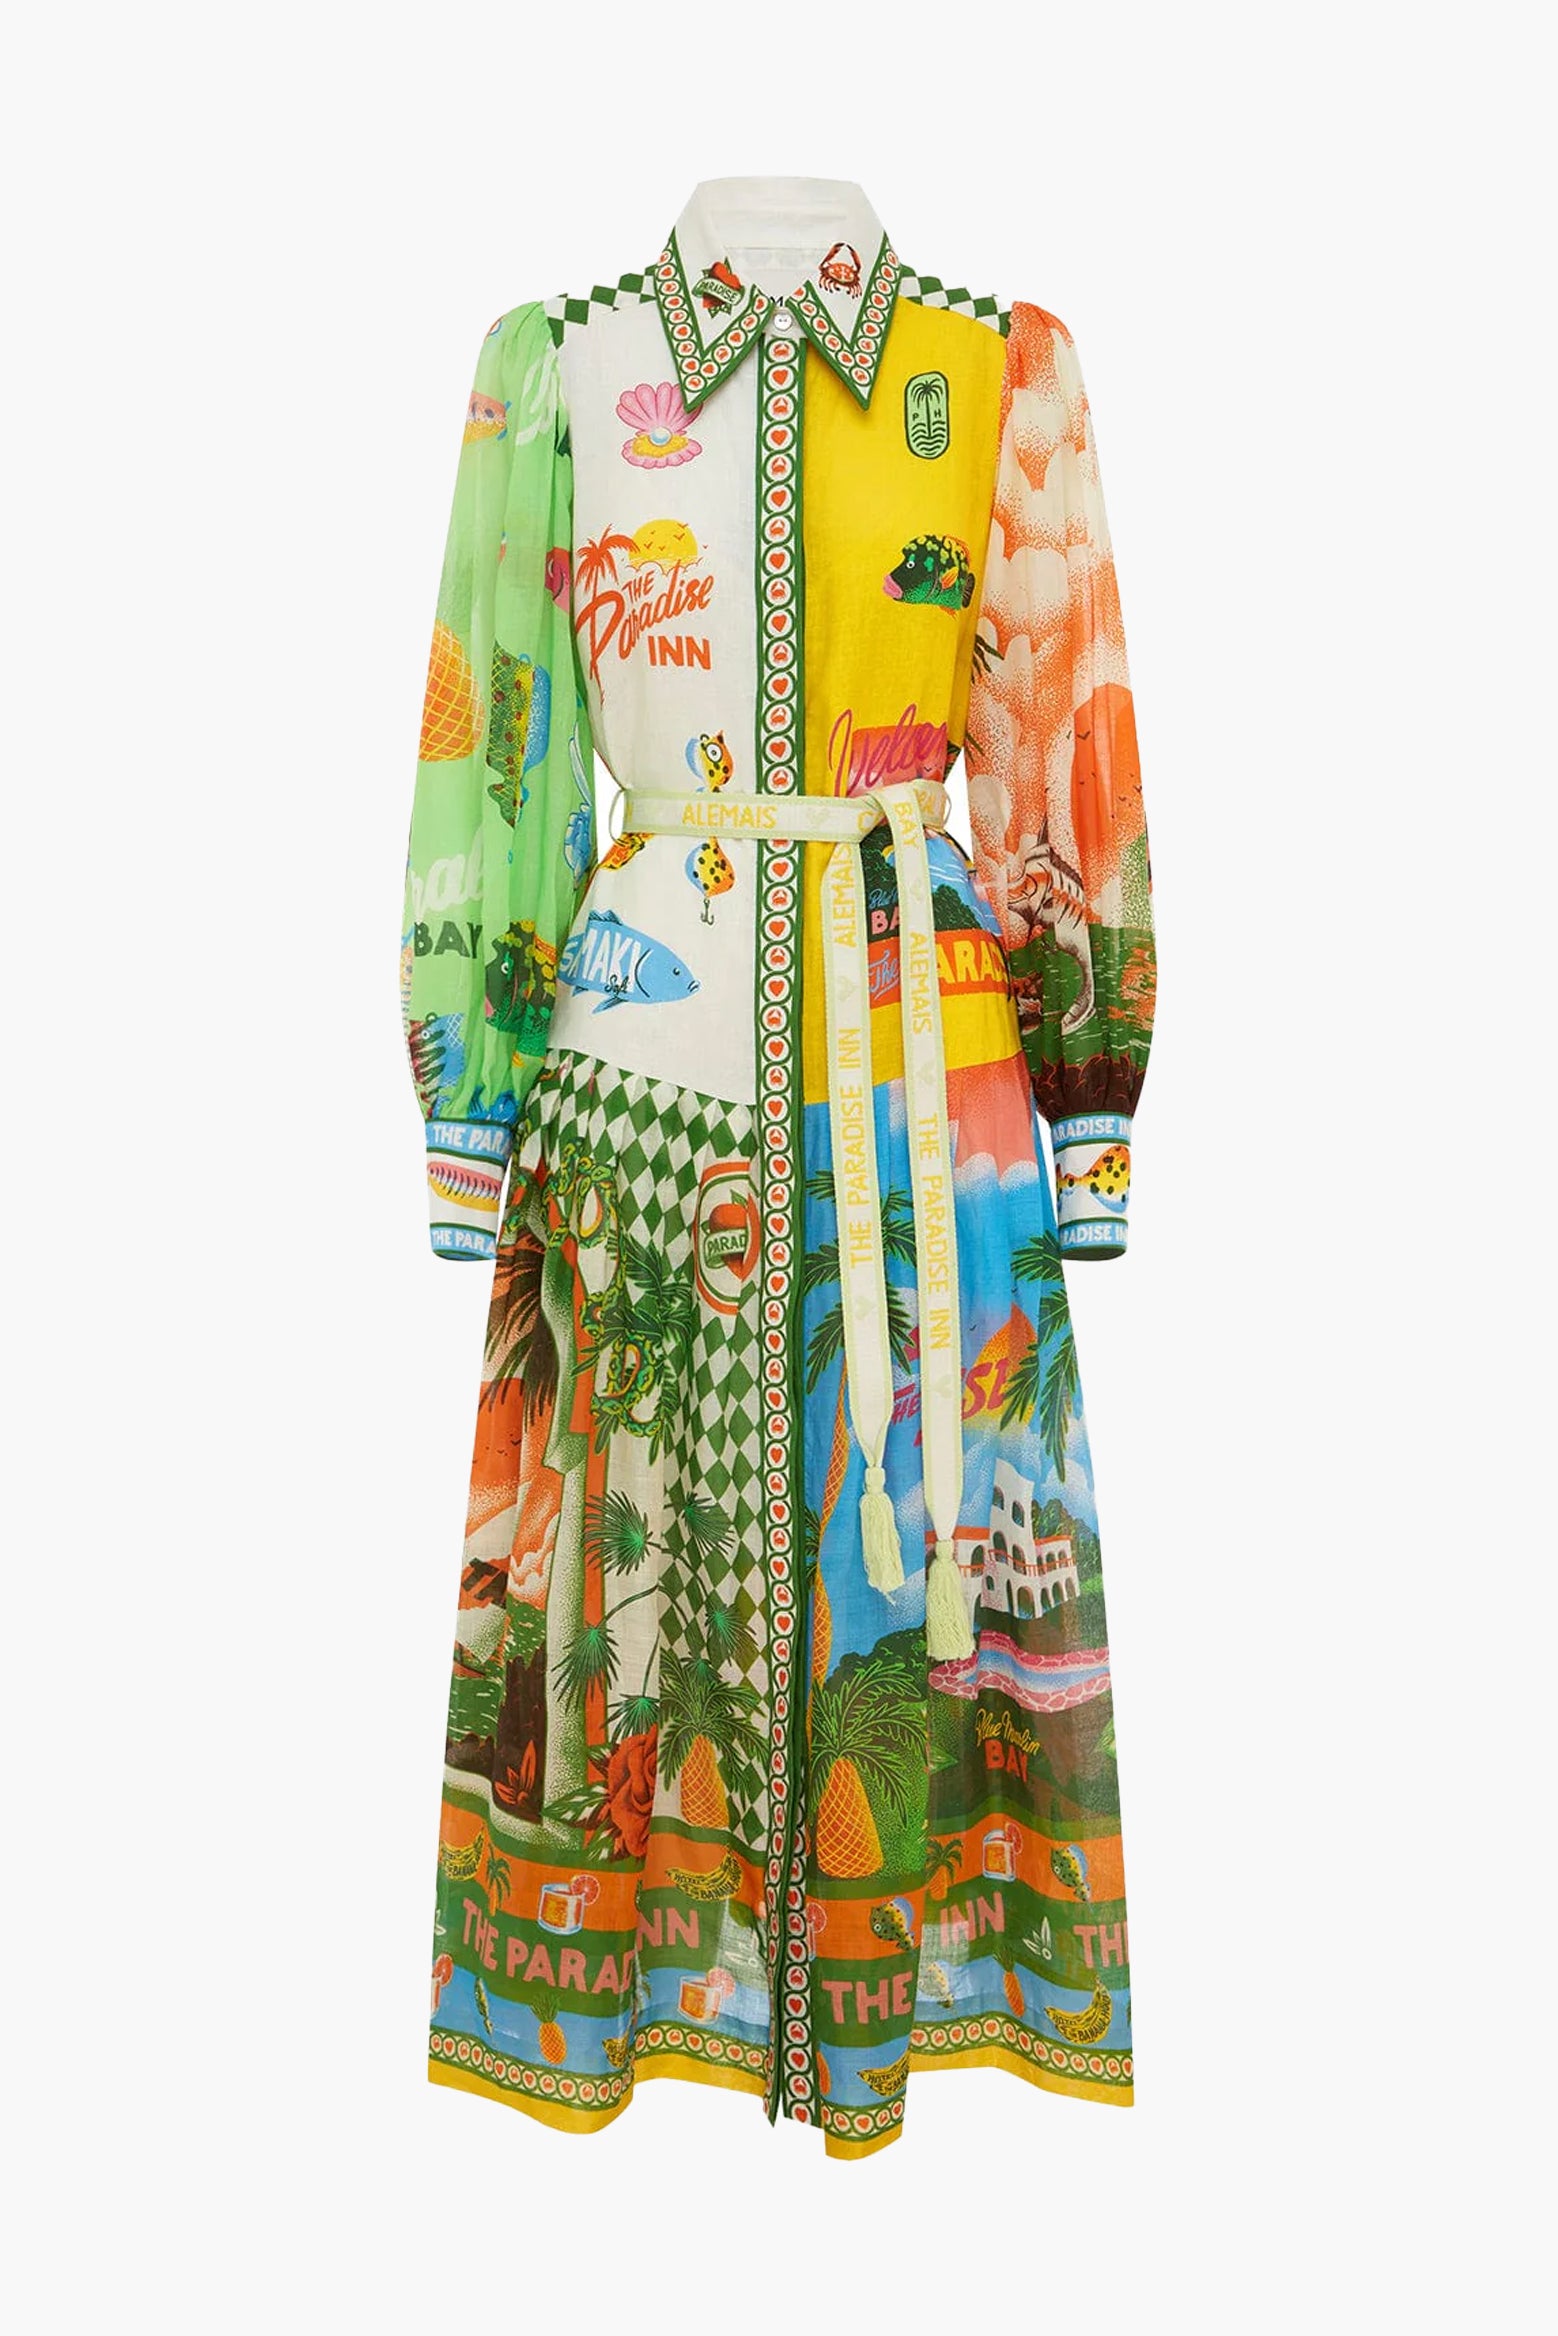 Alemais Paradiso Shirtdress in Multi available at The New Trend Australia. 